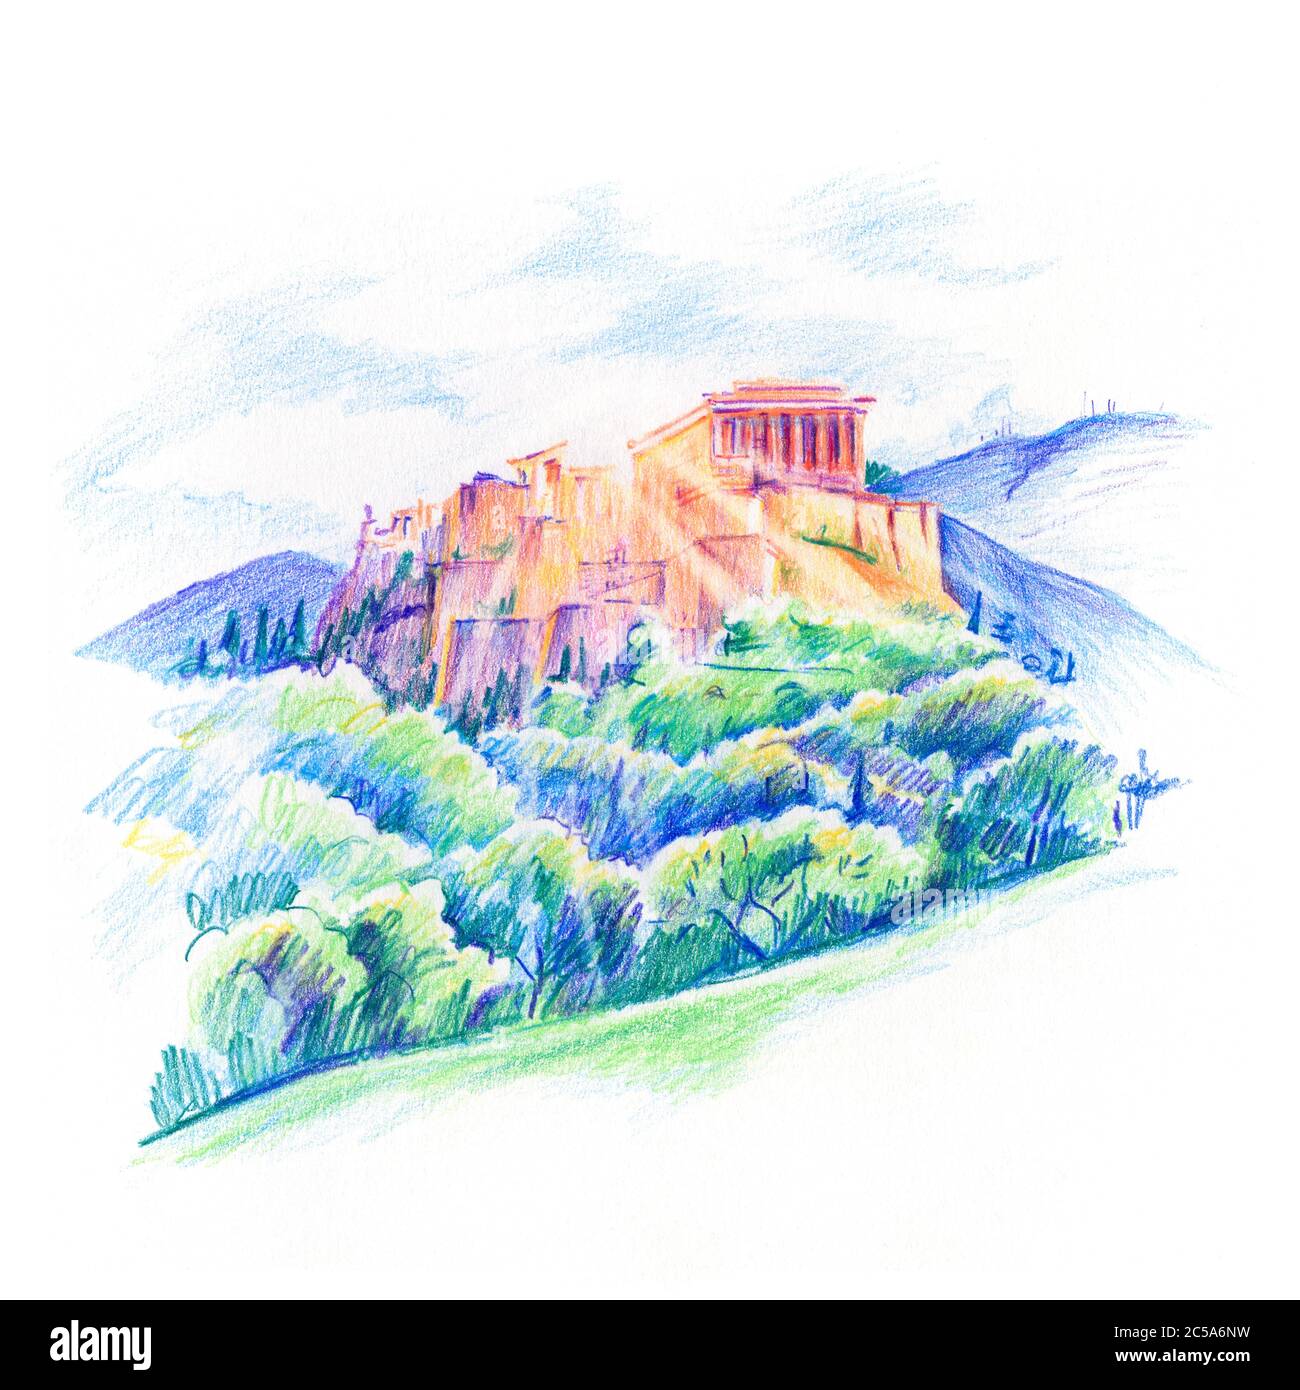 Colour pencil sketch of Acropolis Hill, crowned with Parthenon during evening blue hour in Athens, Greece. Stock Photo